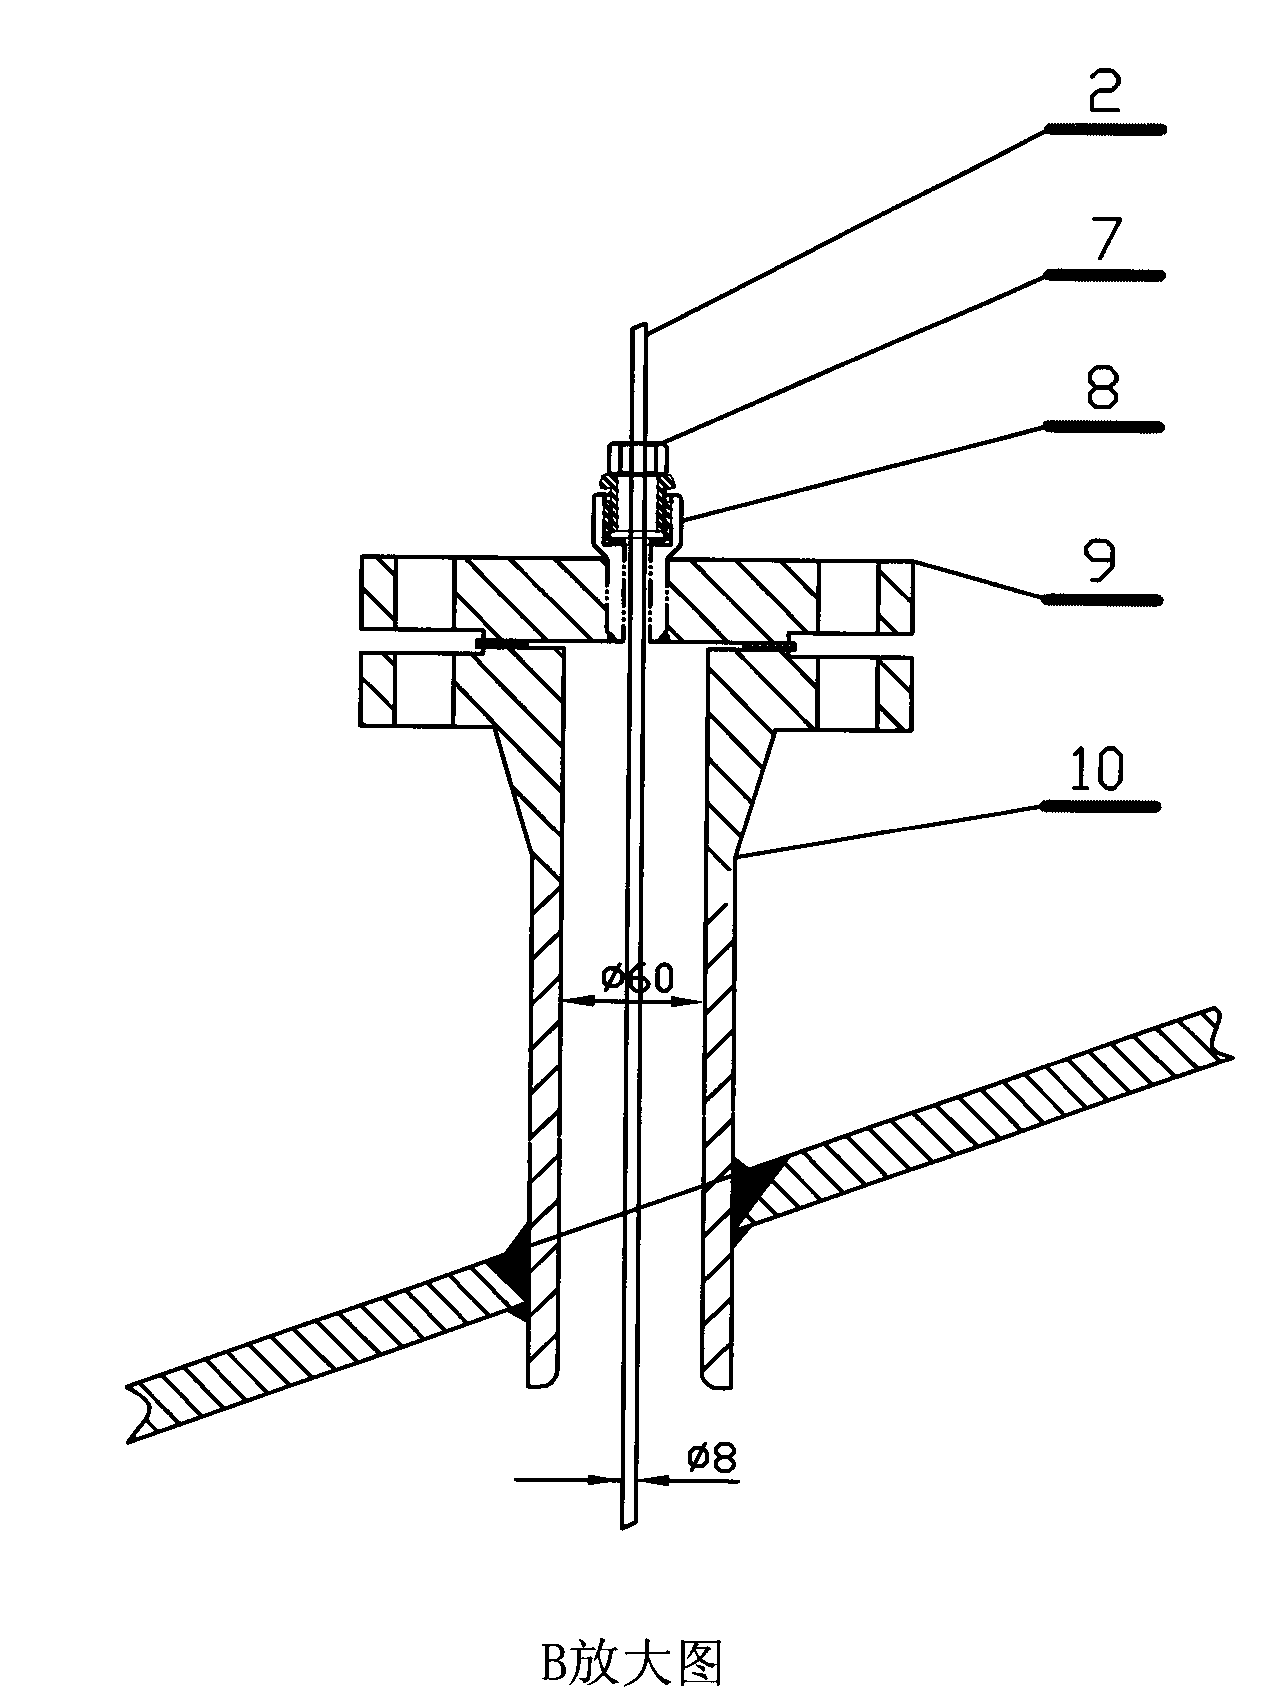 Device for installing thermocouple on reactor in propenoic acid production